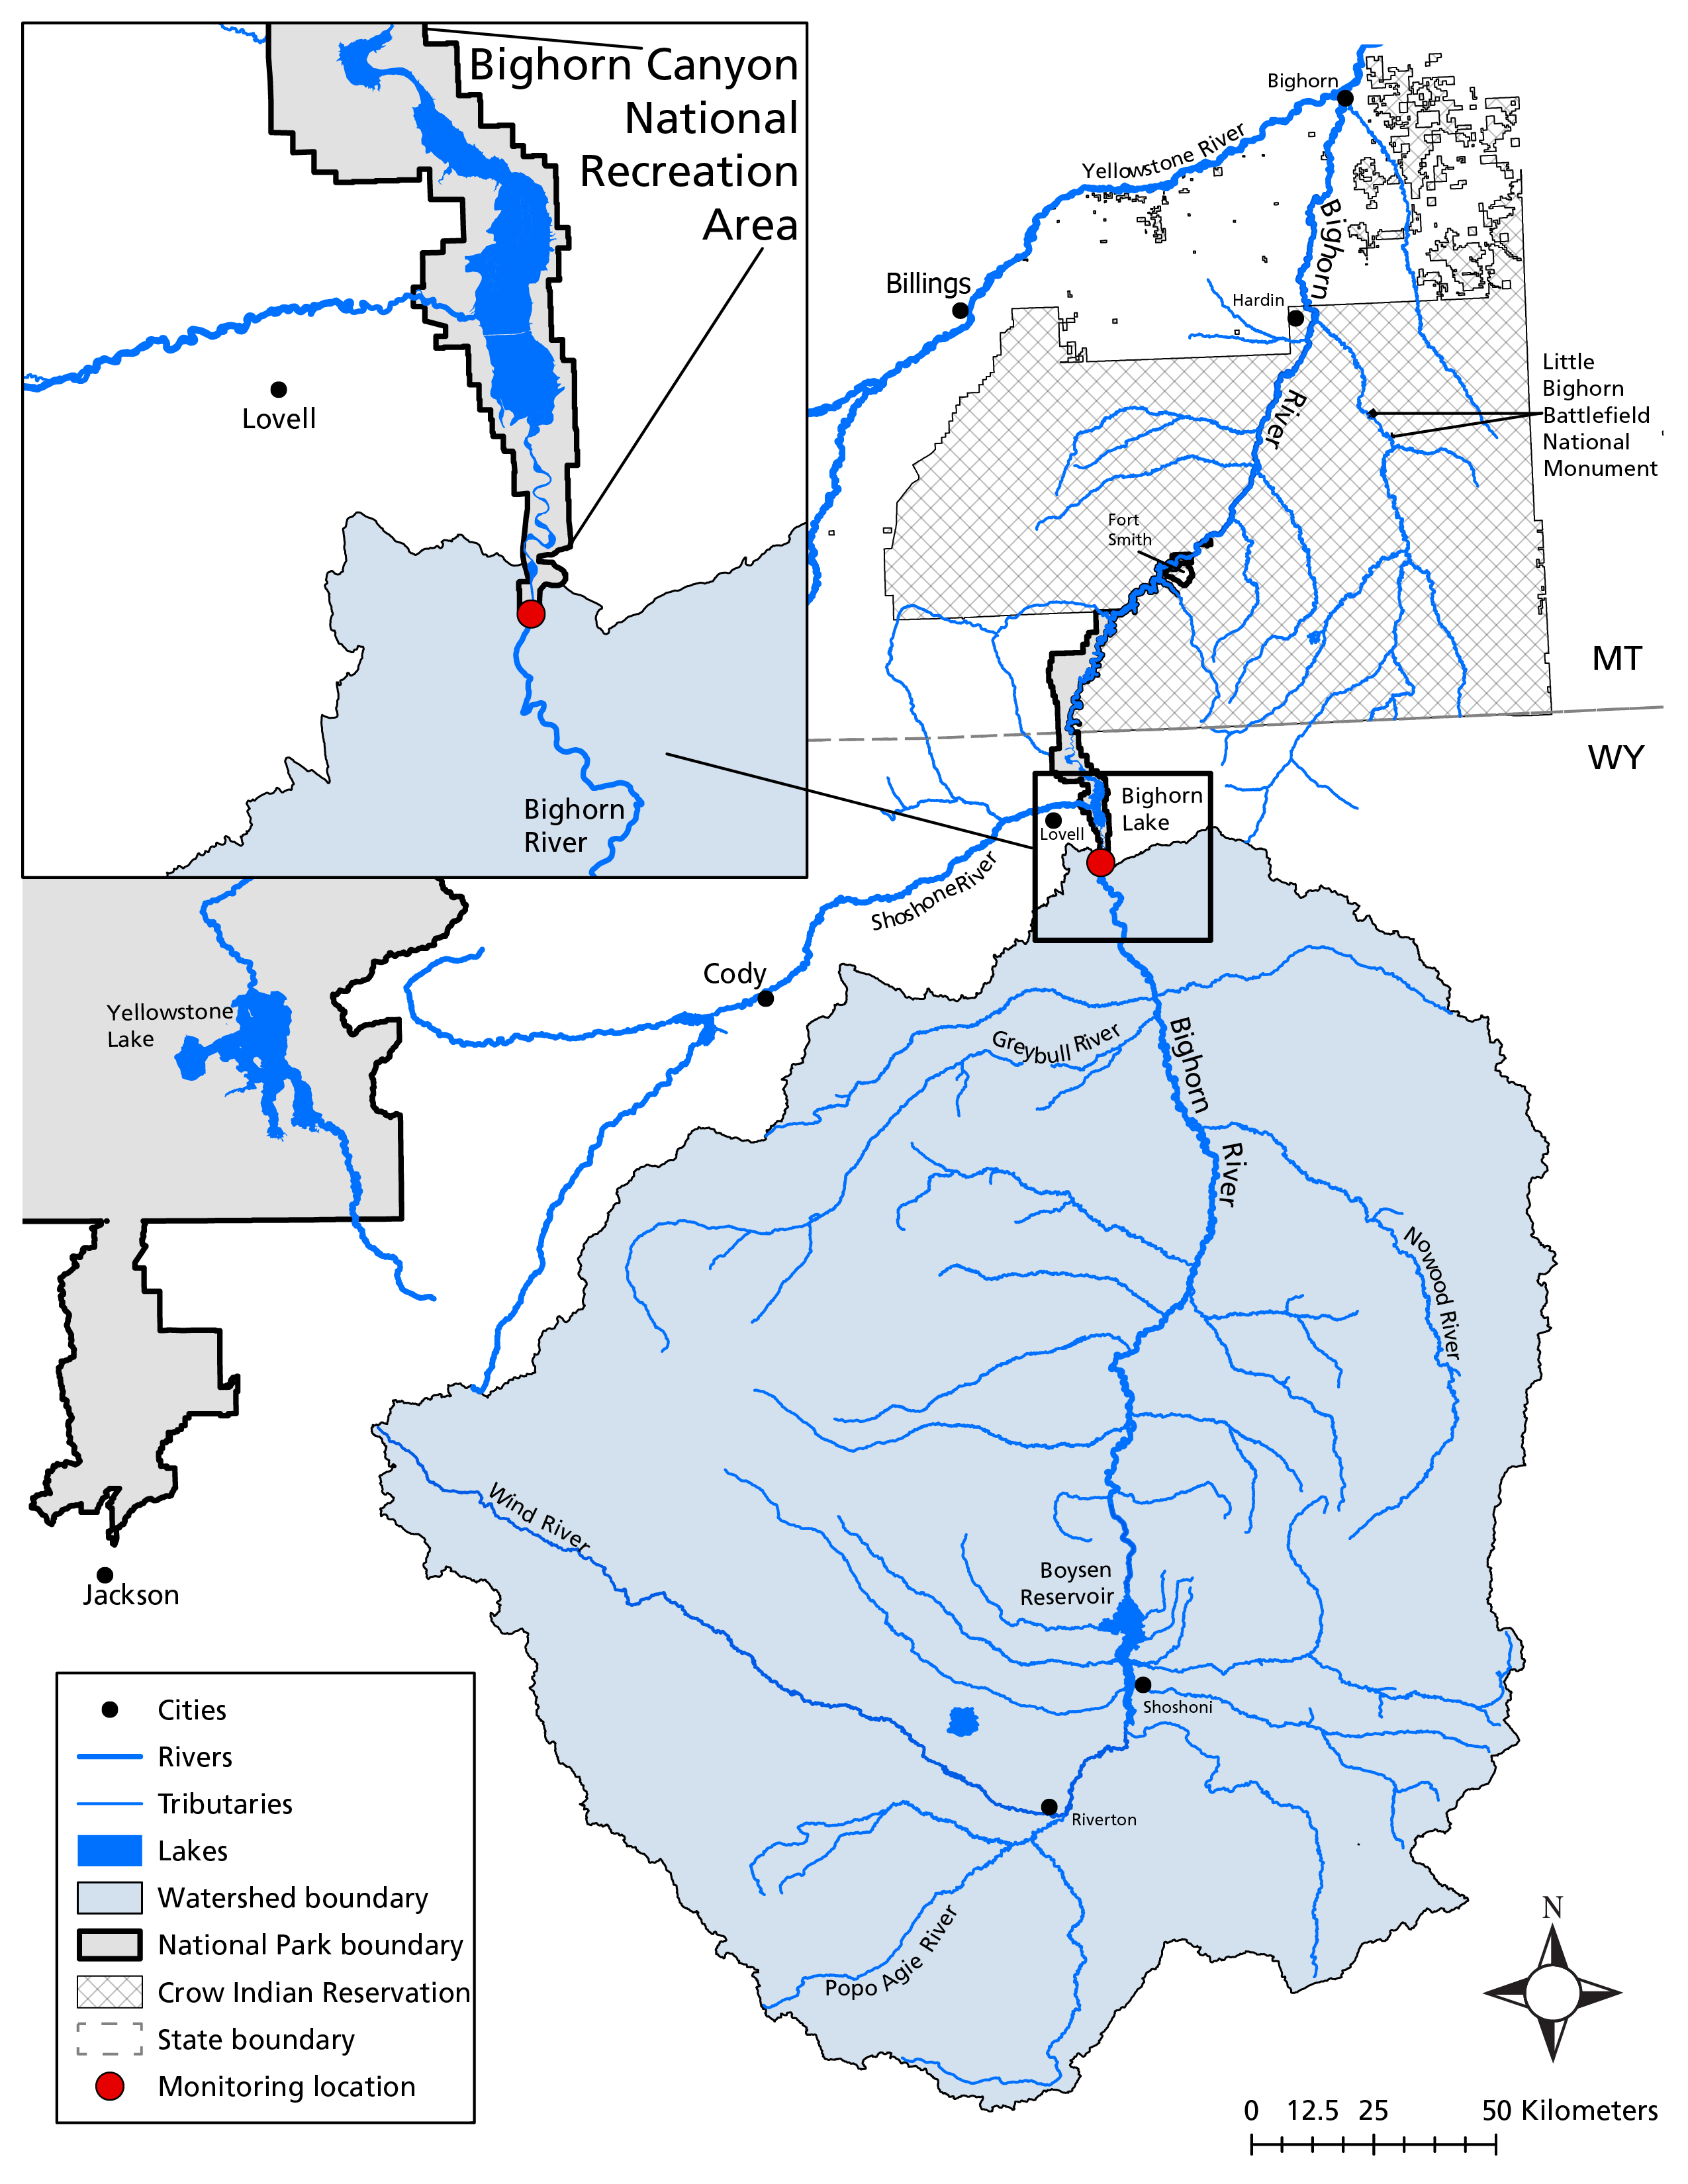 map of watersheds and rivers near the Bighorn River